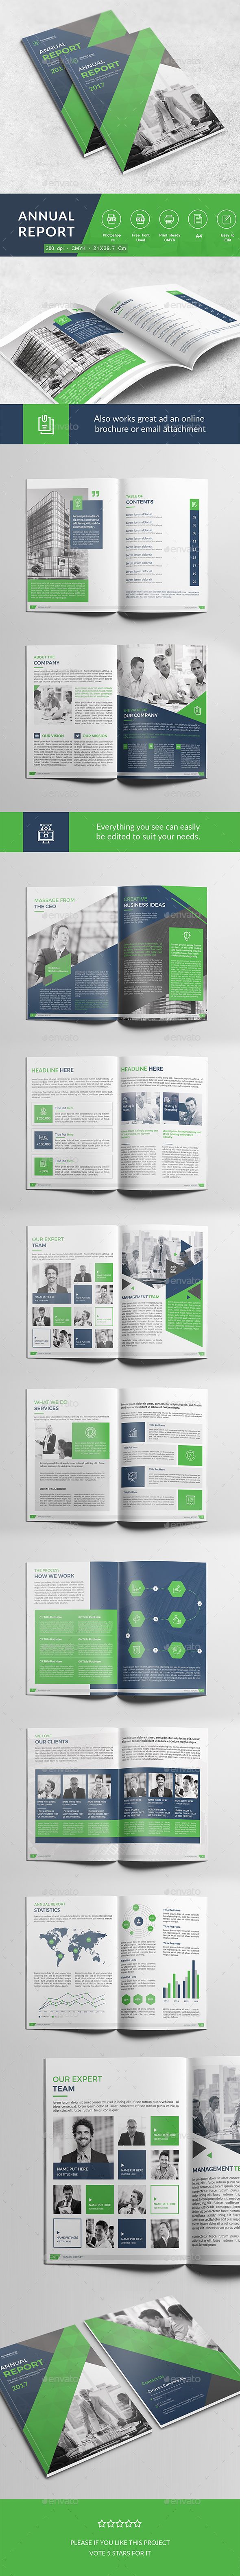 Download Business infographic : Annual Report — PSD Template #summary #corporate • Download graphicrive ...